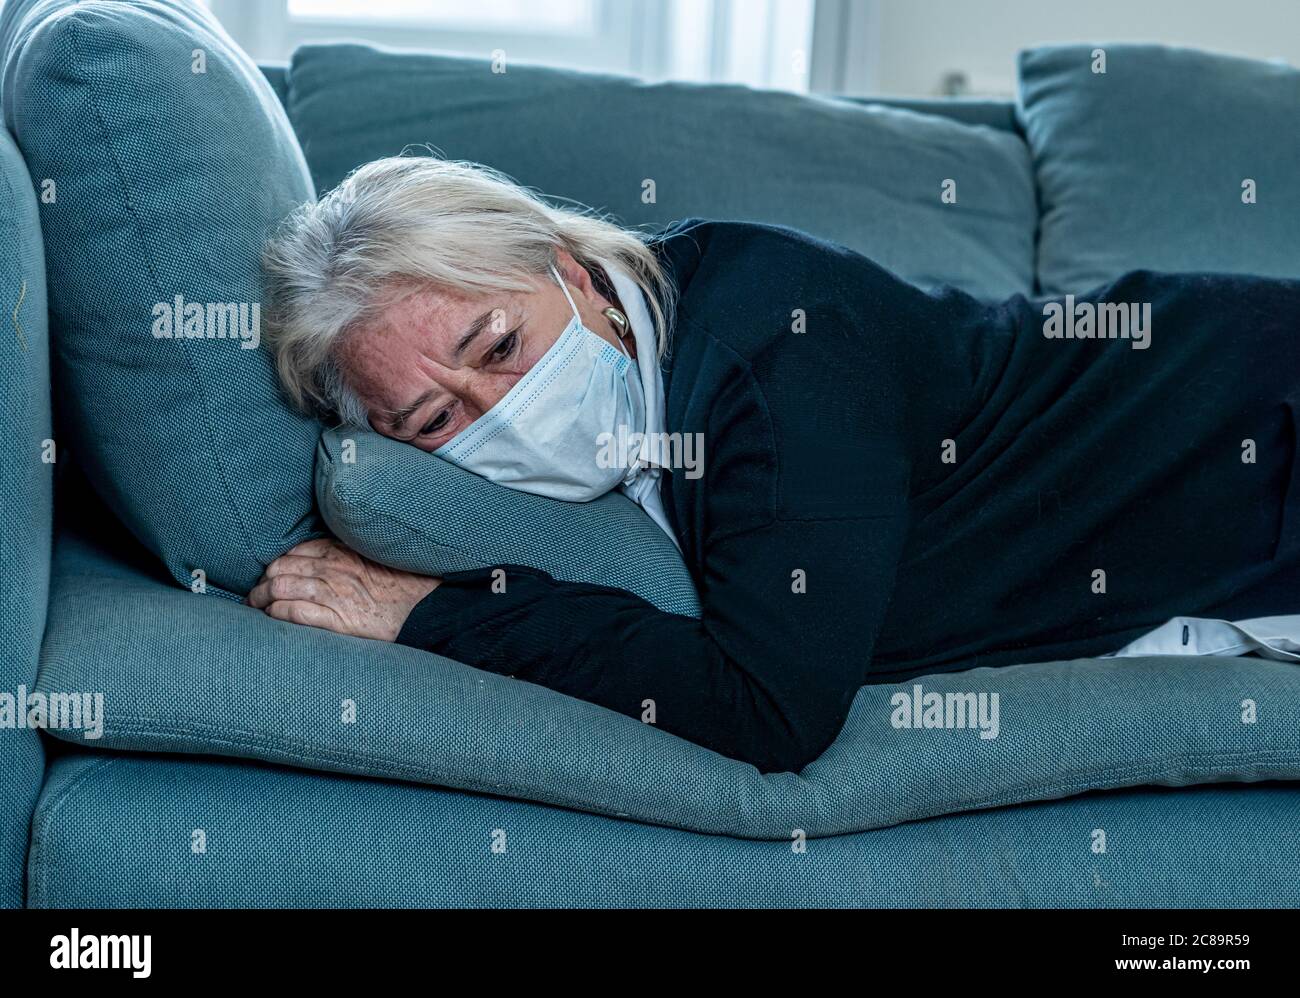 Lonely depressed senior widow woman with protective mask crying on couch isolated at home, sad and worried missing husband and family in COVID-19 deat Stock Photo